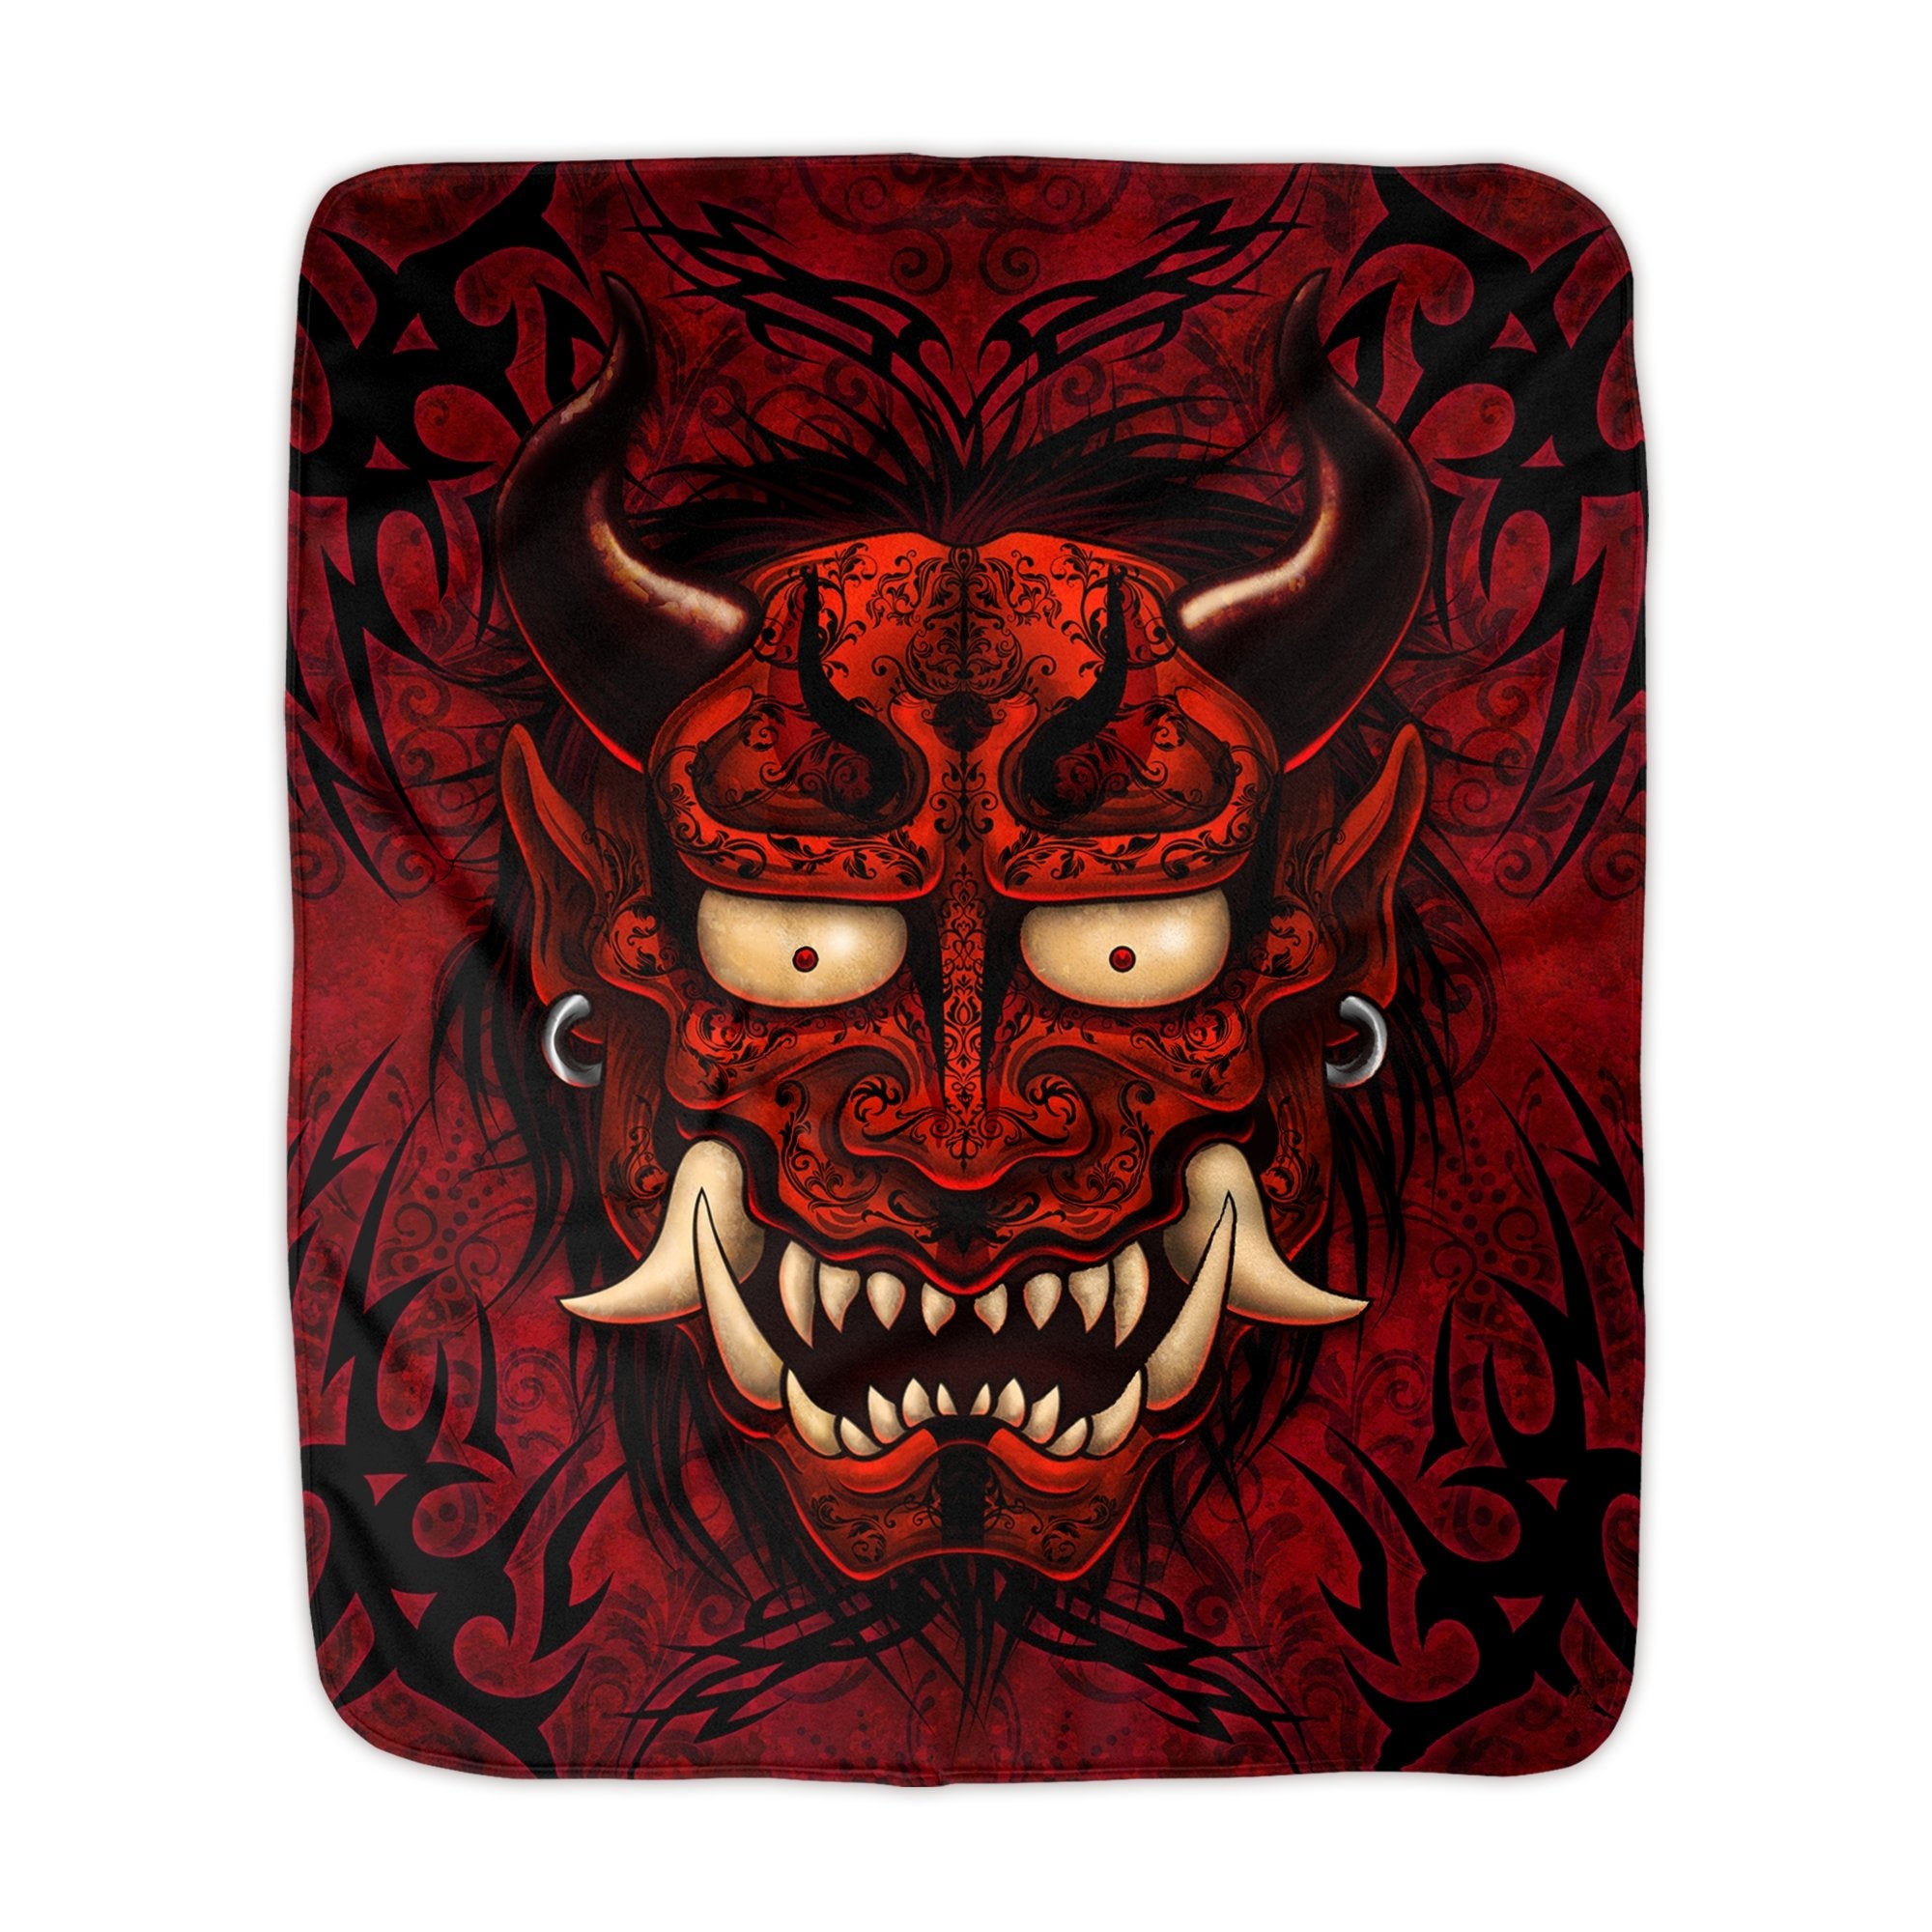 Oni Throw Fleece Blanket, Japanese Demon, Eclectic Home Decor, Tattoo style, Alternative Art Gift - Red and Black - Abysm Internal